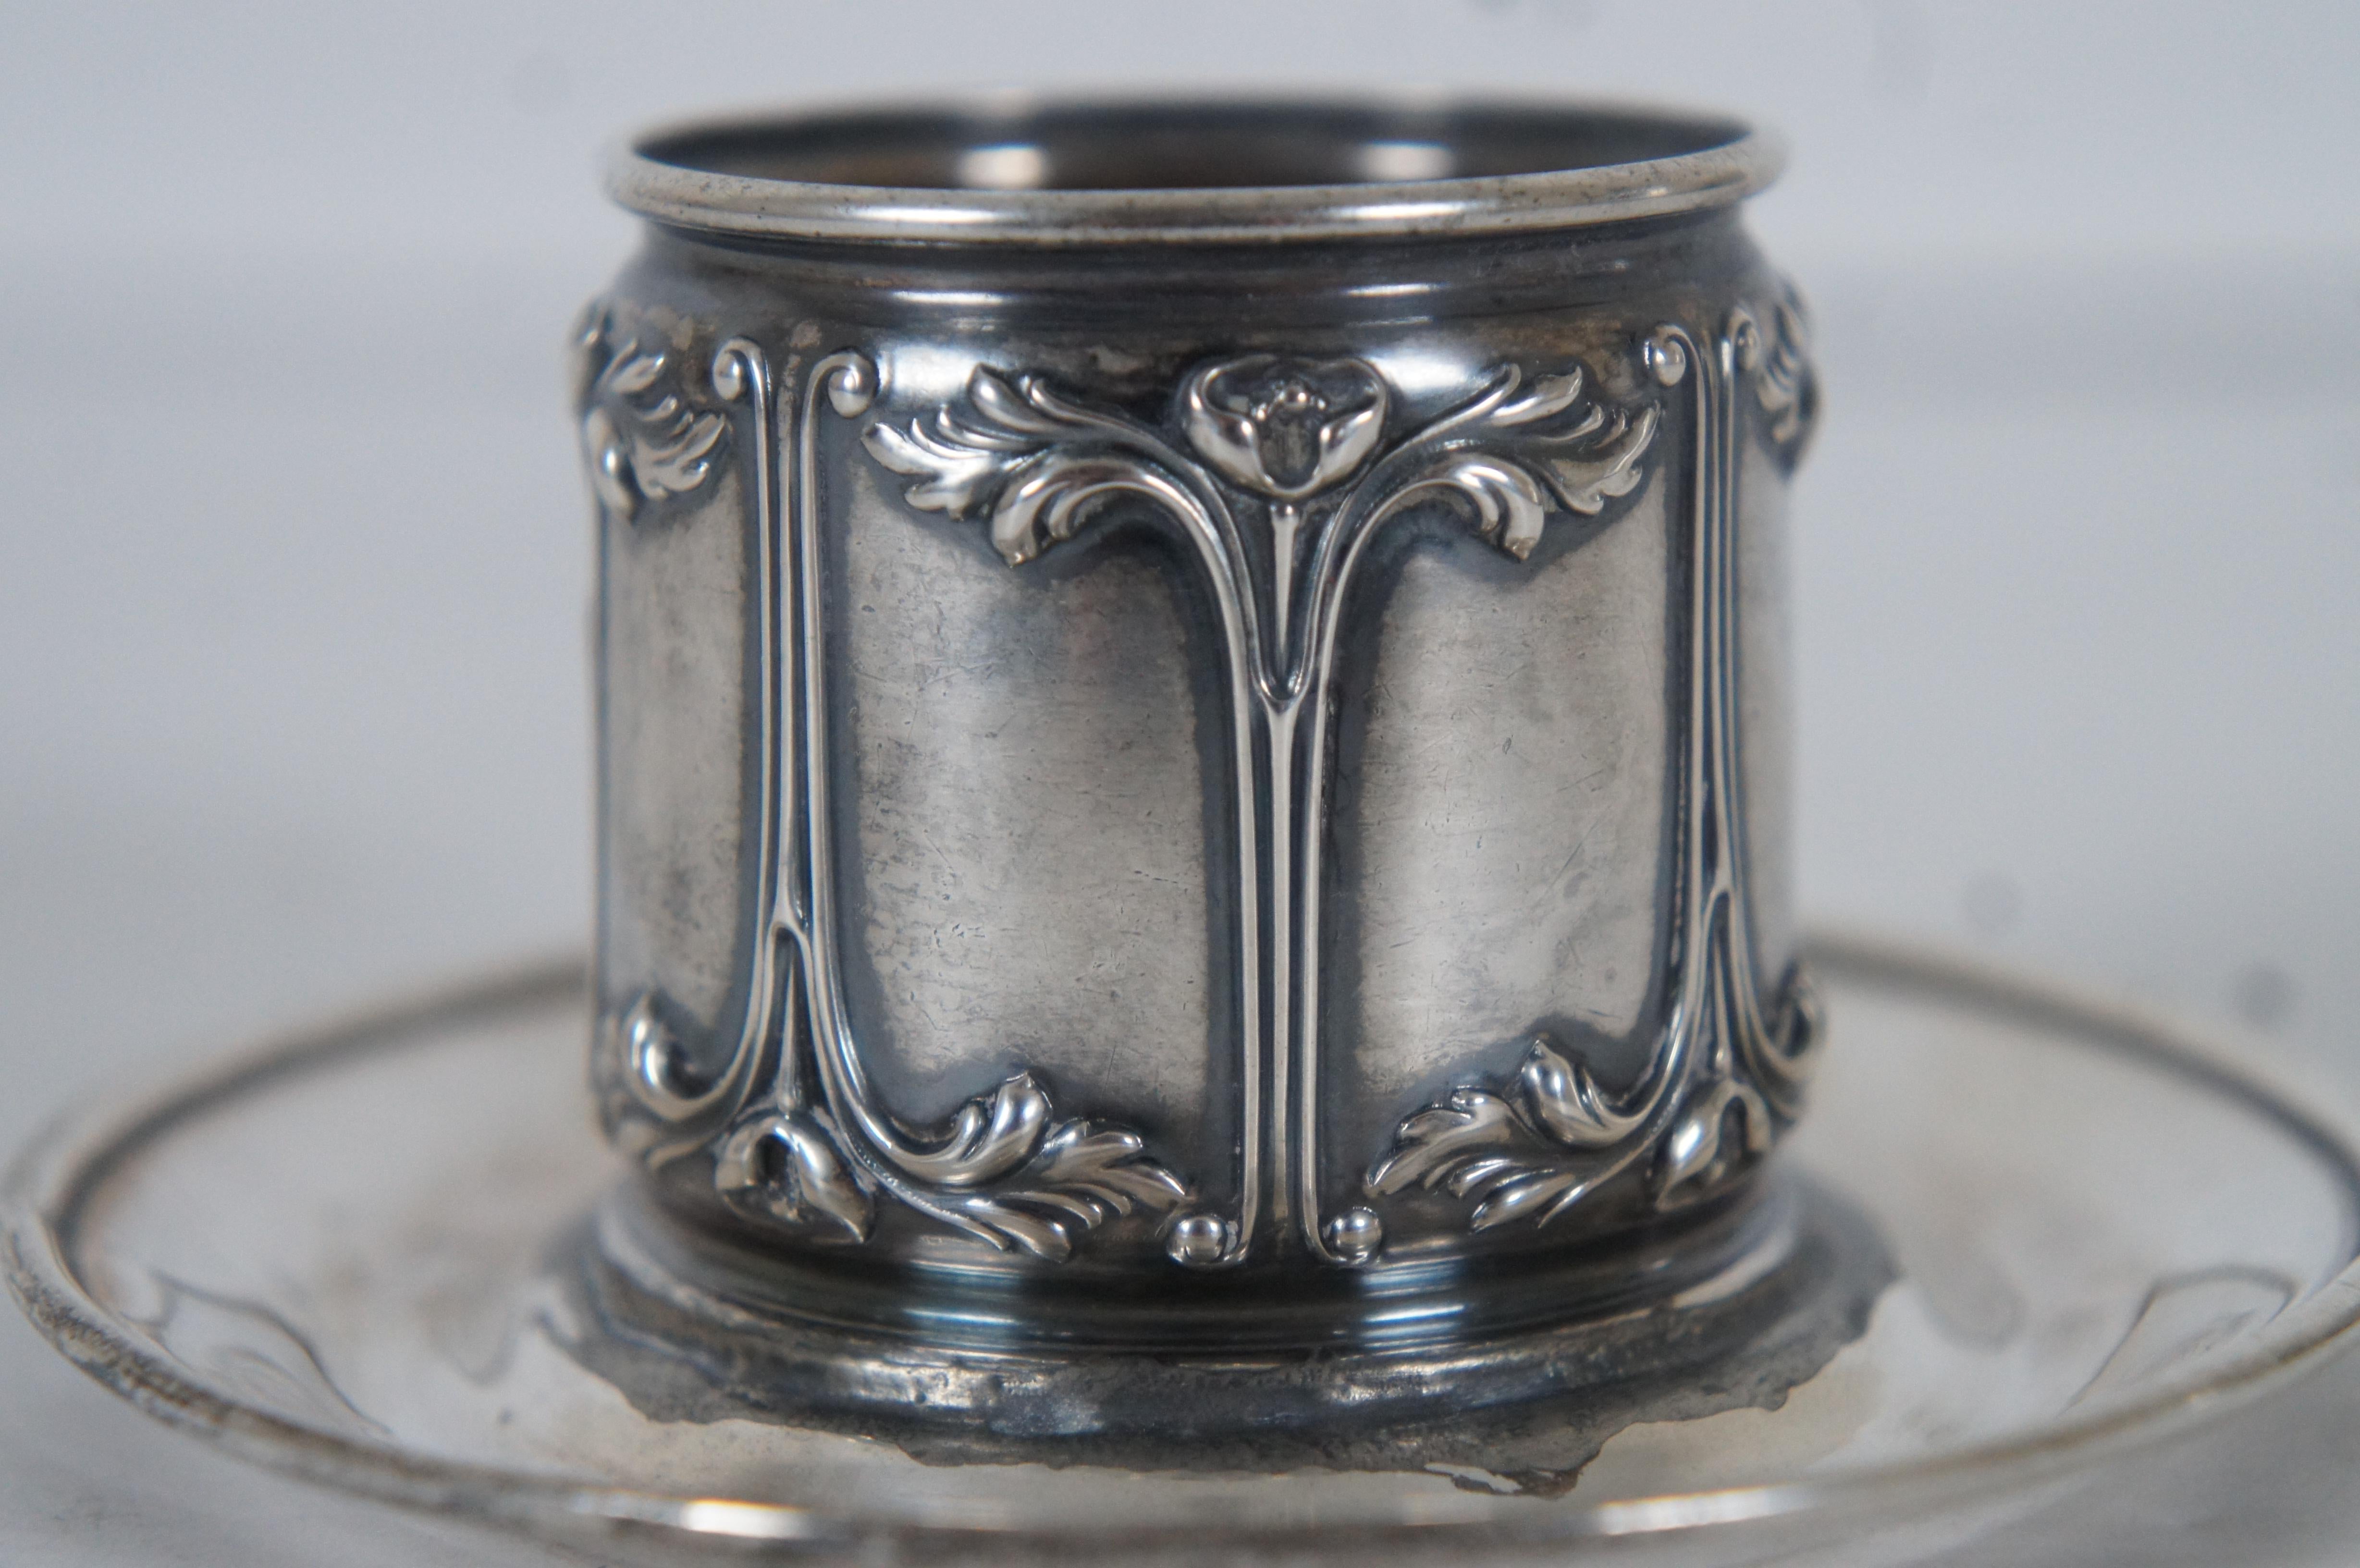 19th Century Antique Gorham & Webster Repousse Sterling Silver Footed Toothpick Match Holder